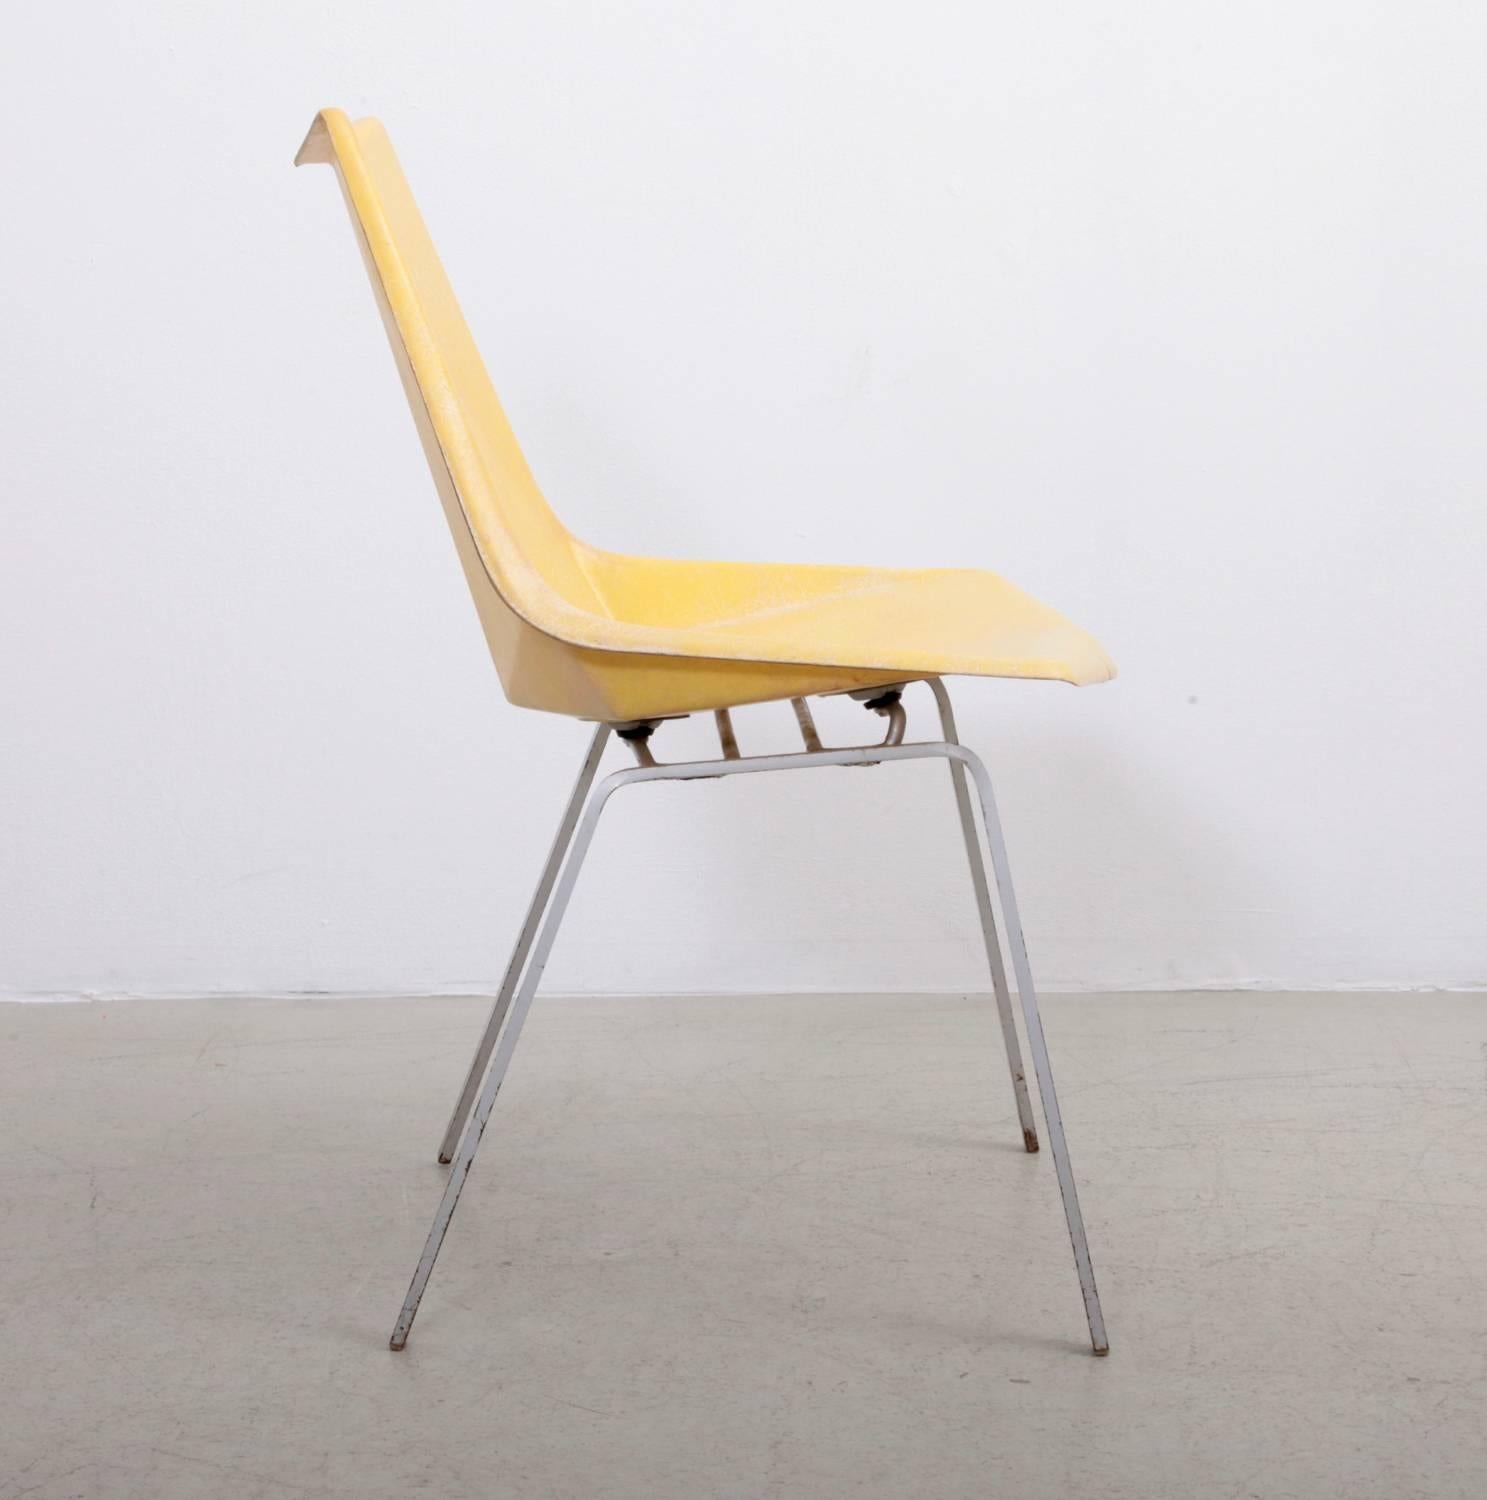 Paul McCobb Yellow Origami Side Chair on Rare Solid Base, USA, 1950s (Moderne der Mitte des Jahrhunderts)